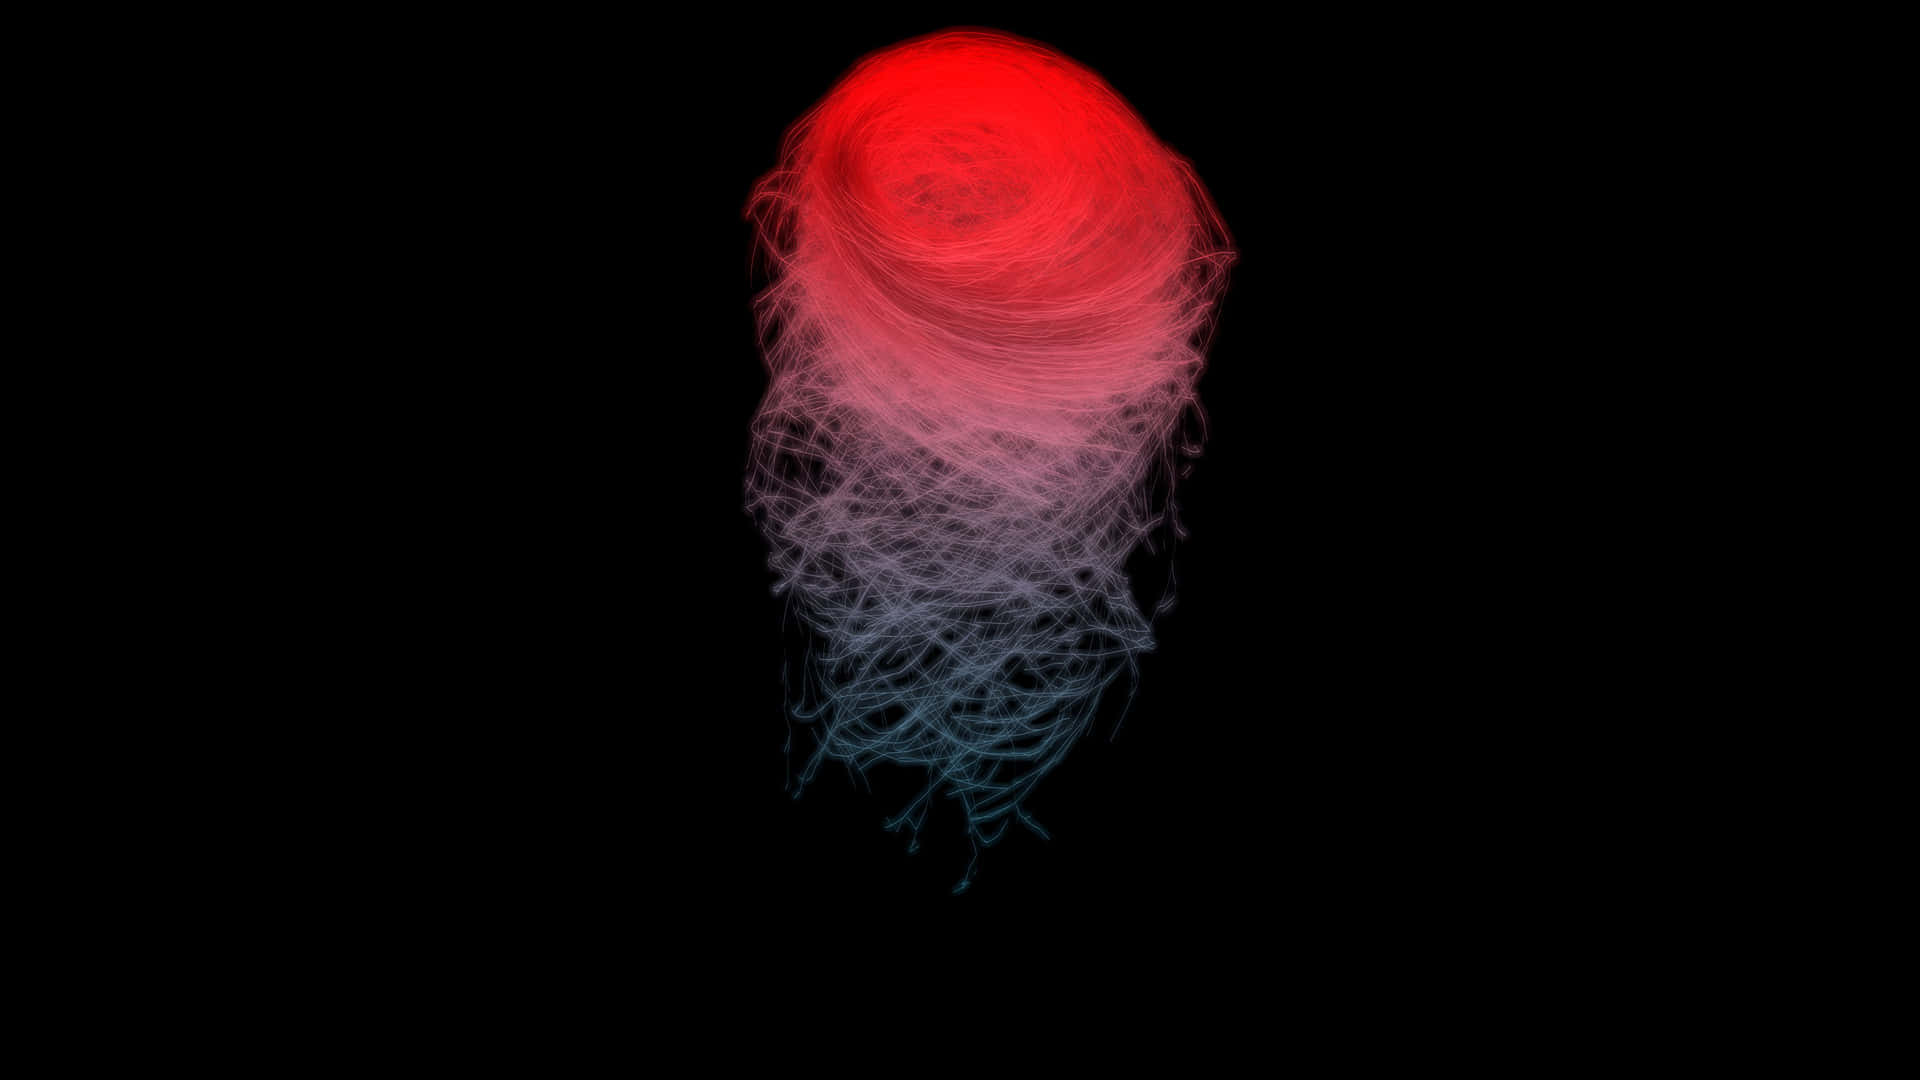 Hd Oled Red Circle Background